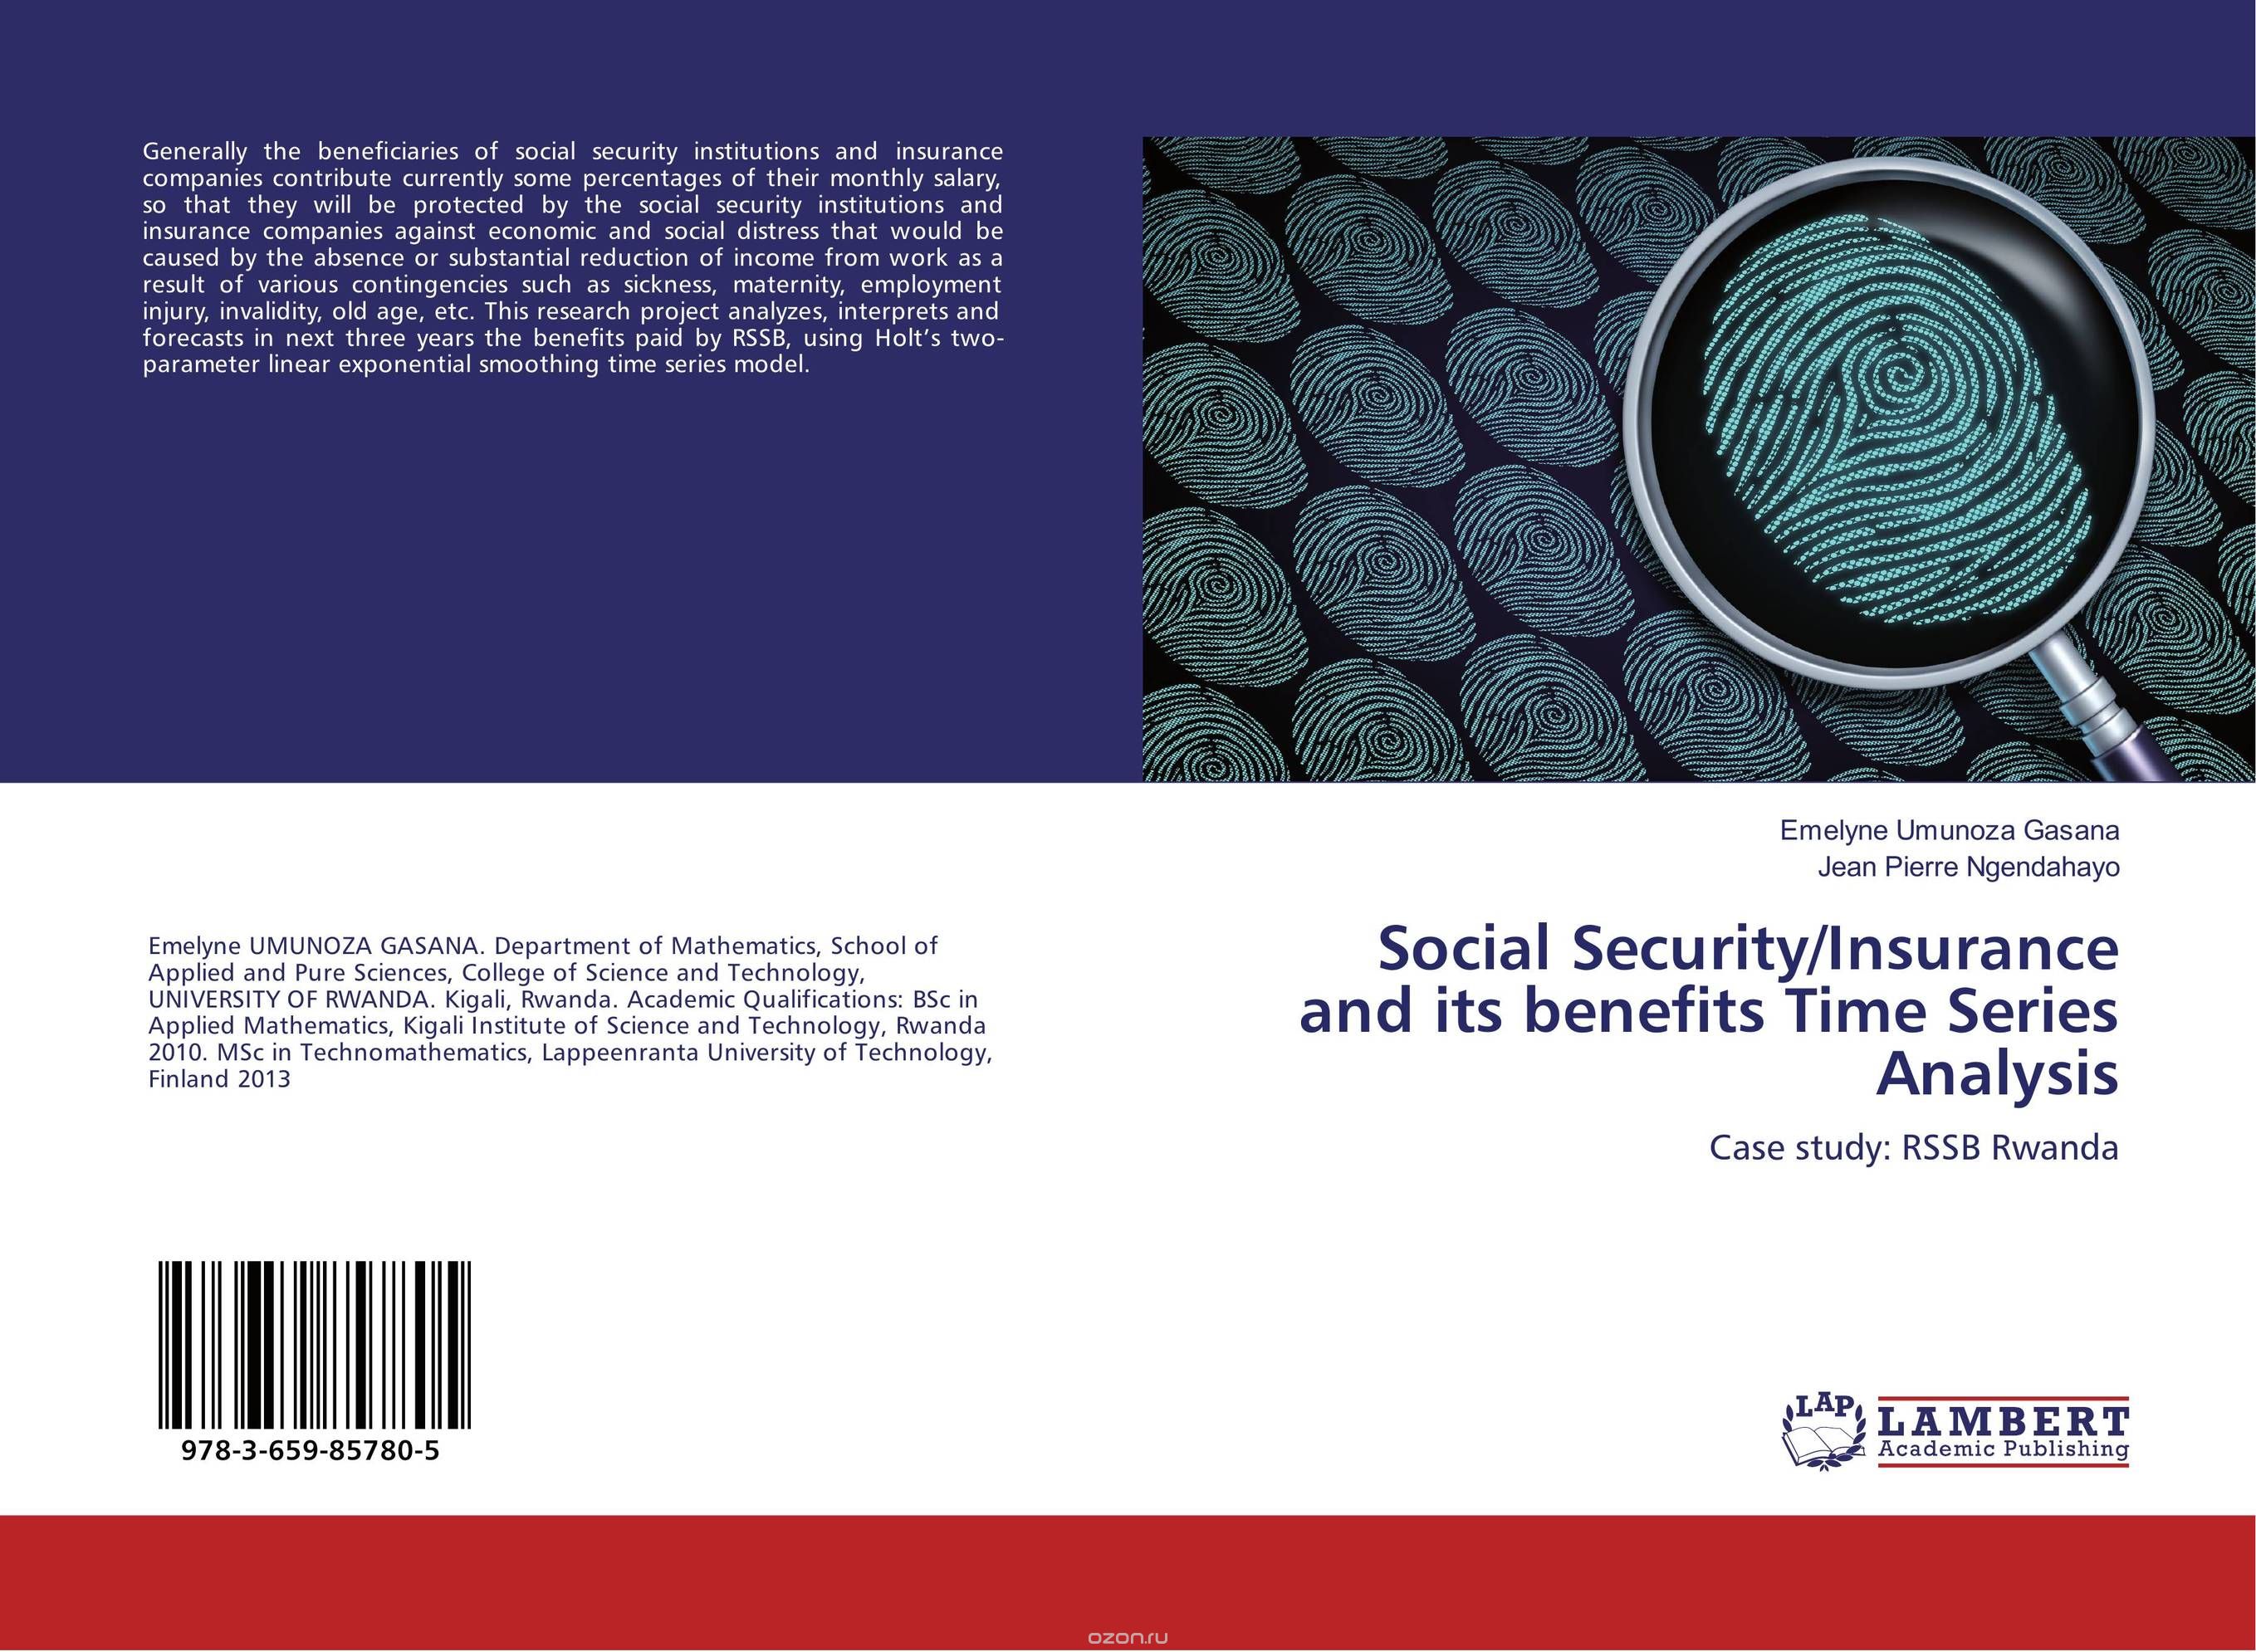 Social Security/Insurance and its benefits Time Series Analysis